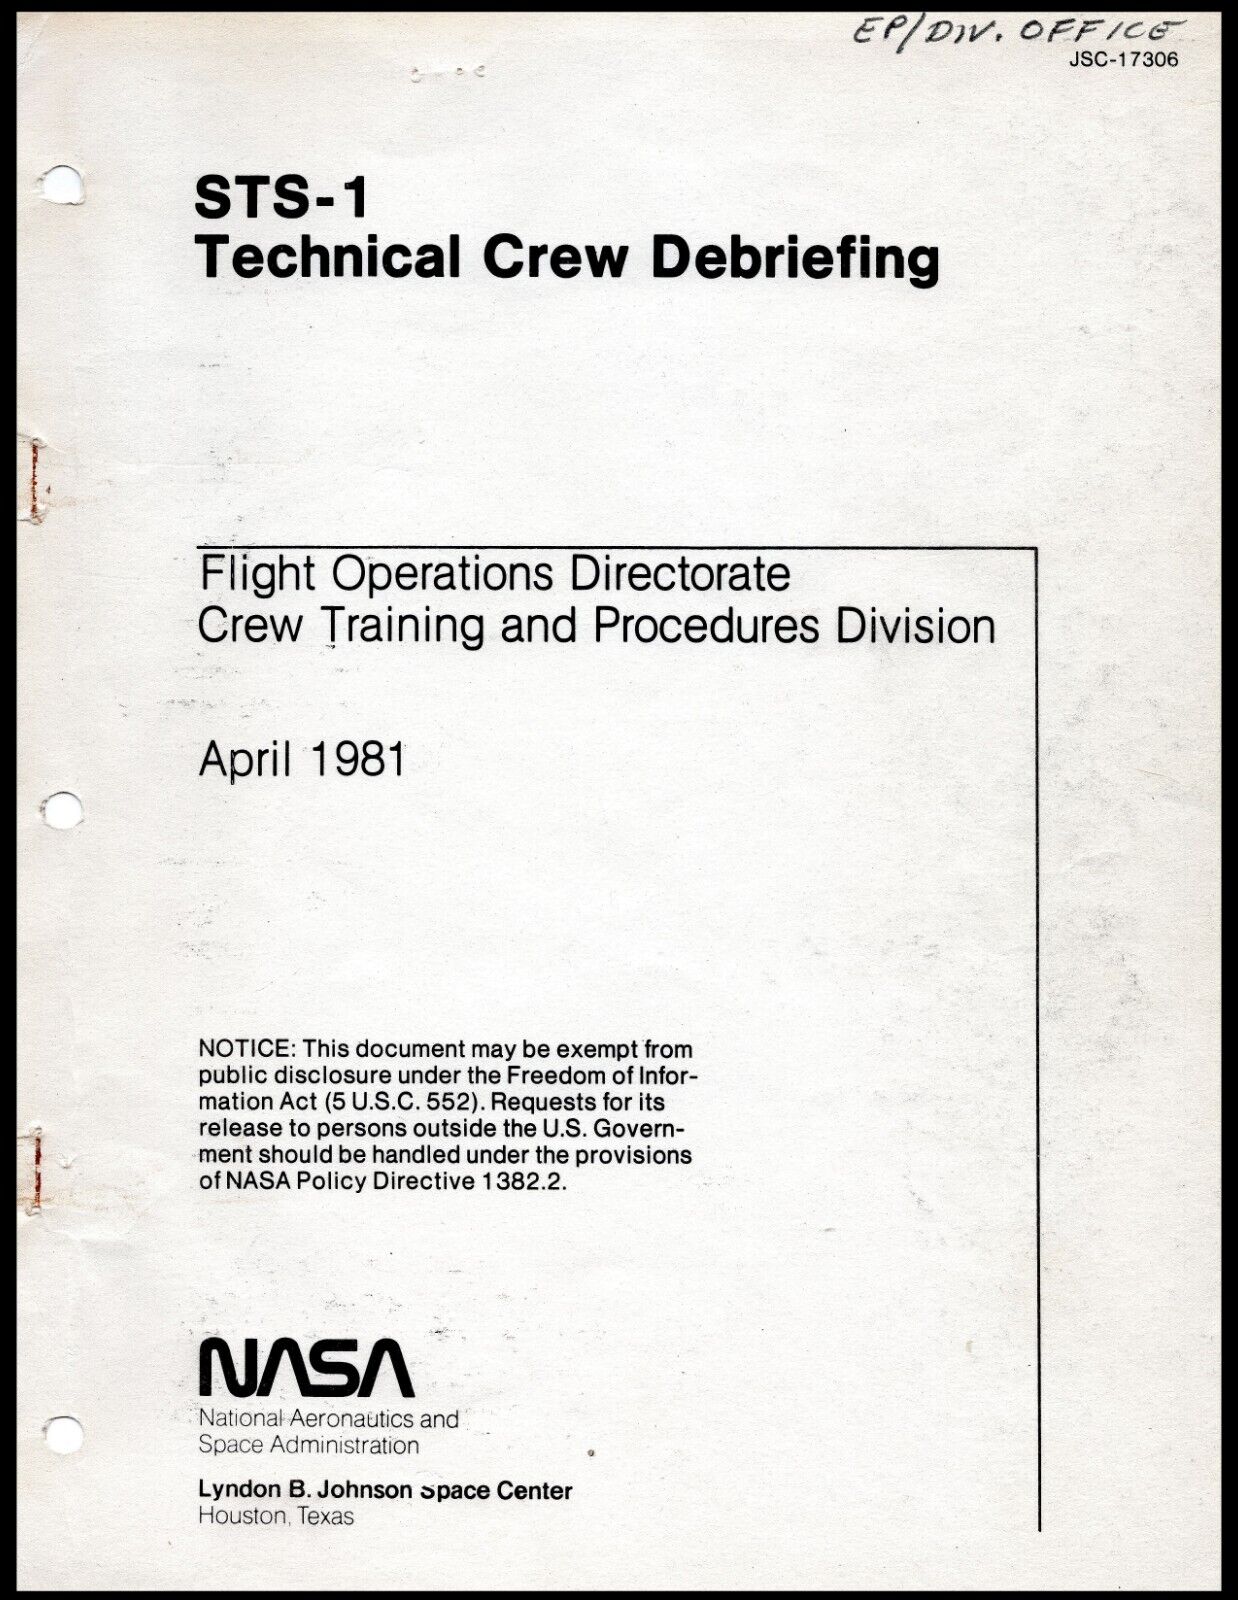 FIRST SHUTTLE FLIGHT-TECHNICAL CREW DEBRIEFING REPORT-\'81 STS-1 ORBITER COLUMBIA